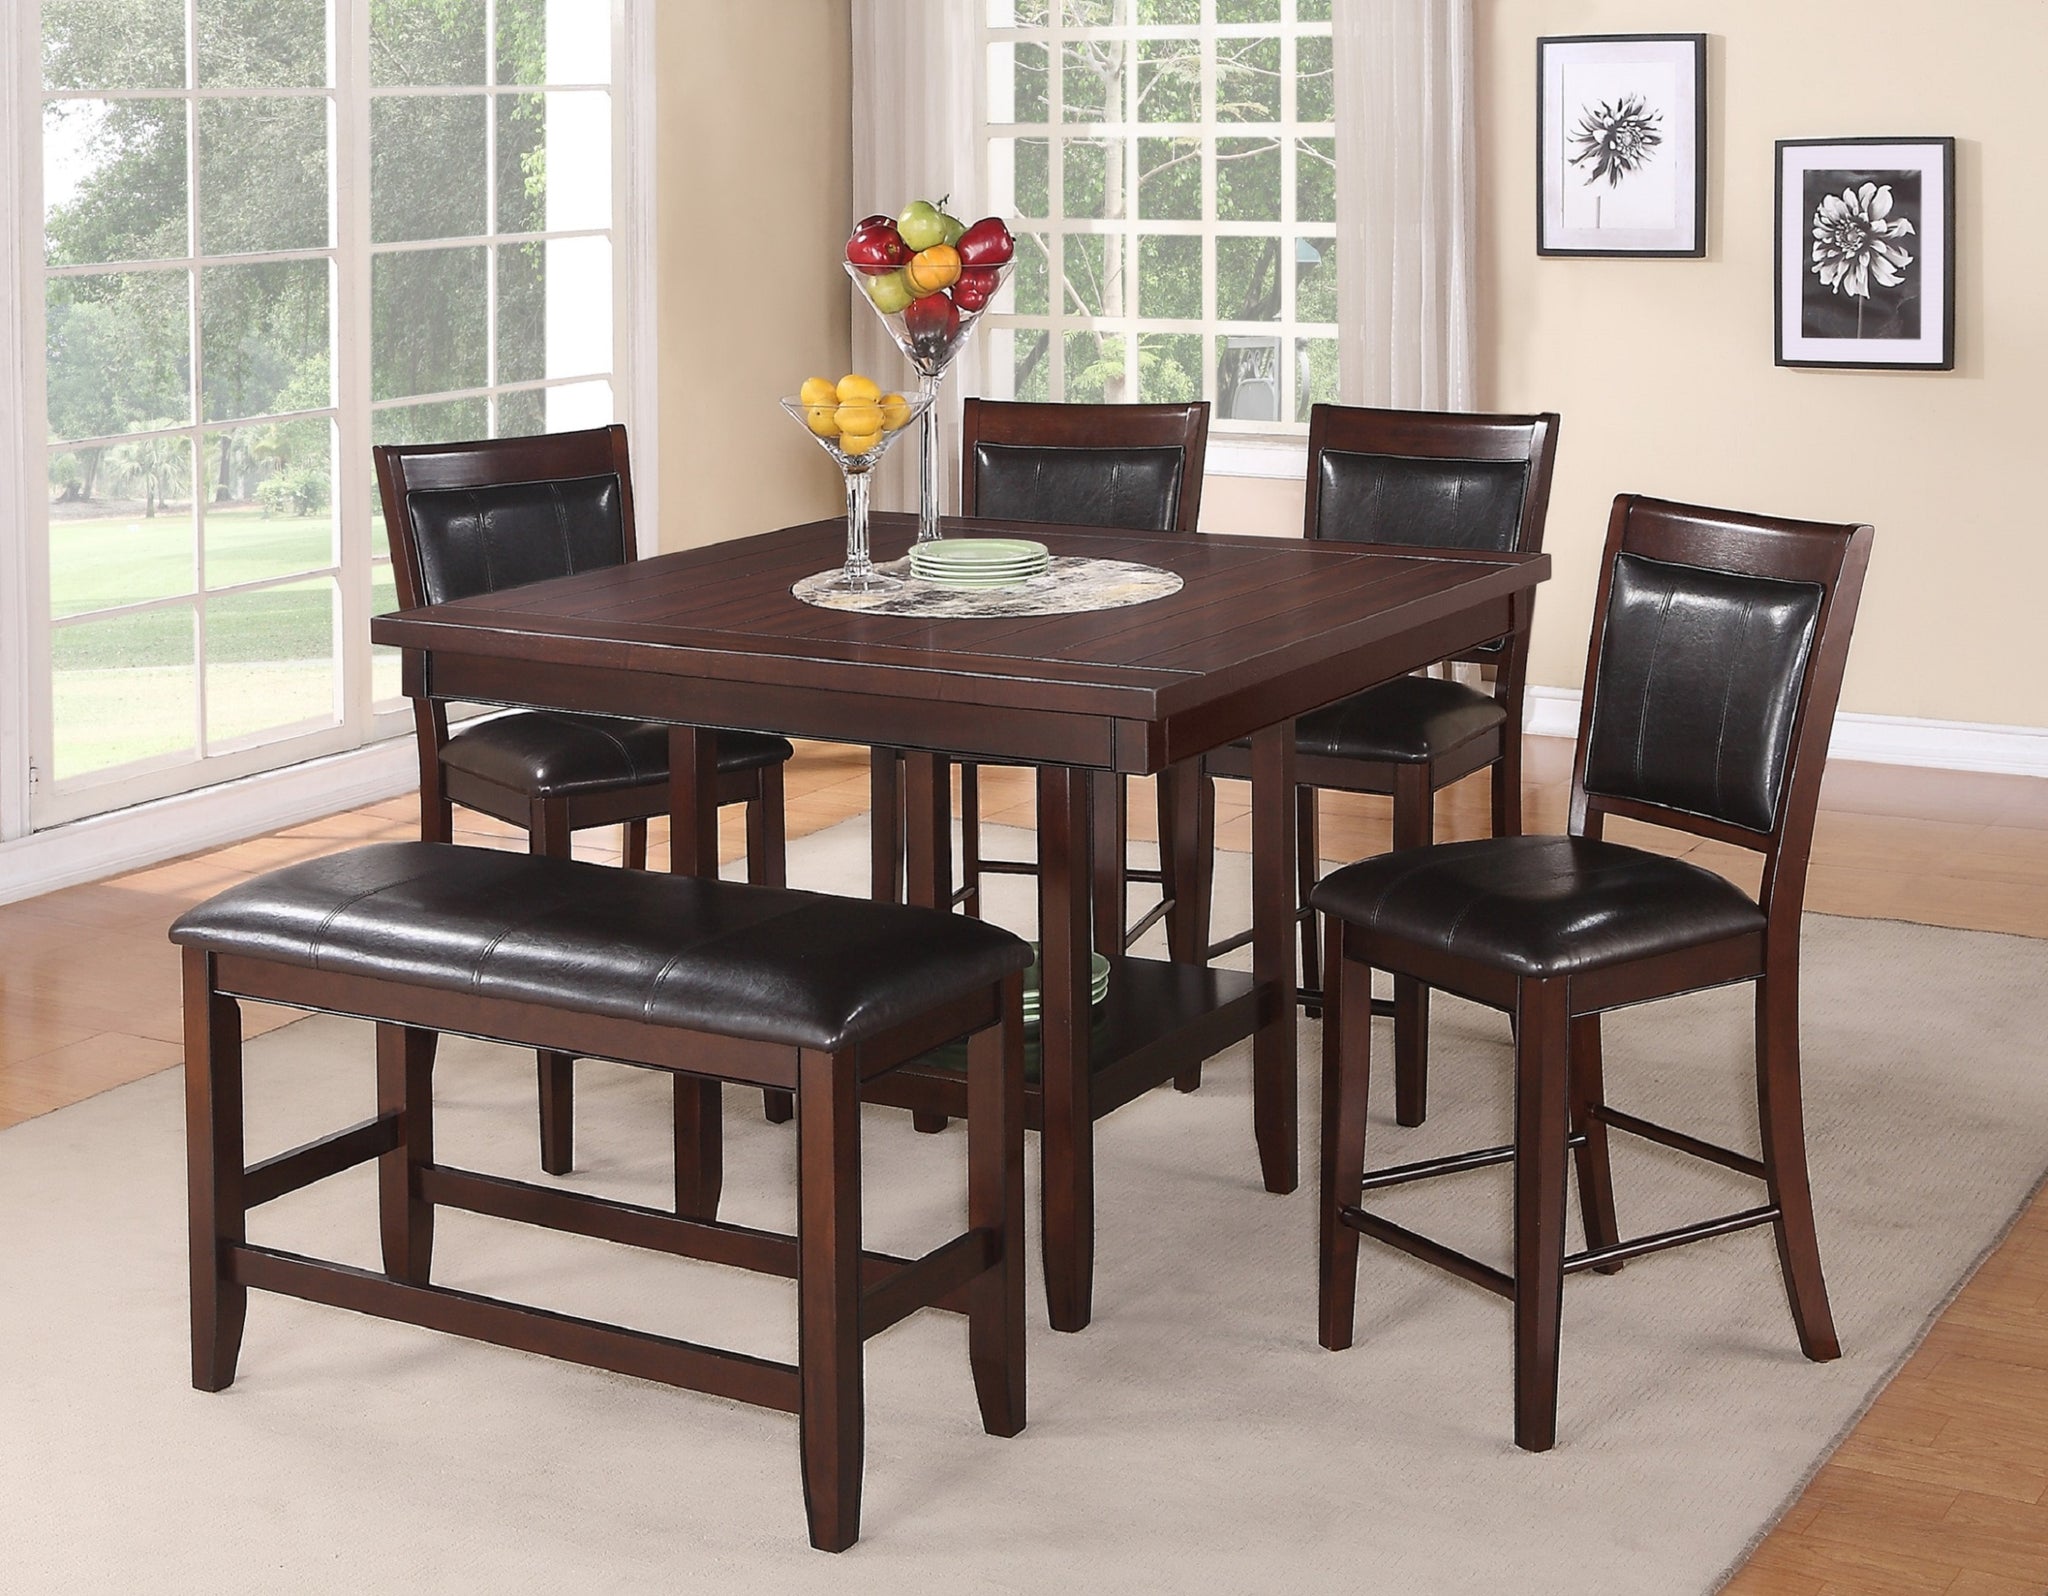 6pc Dining Set Contemporary Farmhouse Style Counter upholstered chair-wood-dark brown-seats